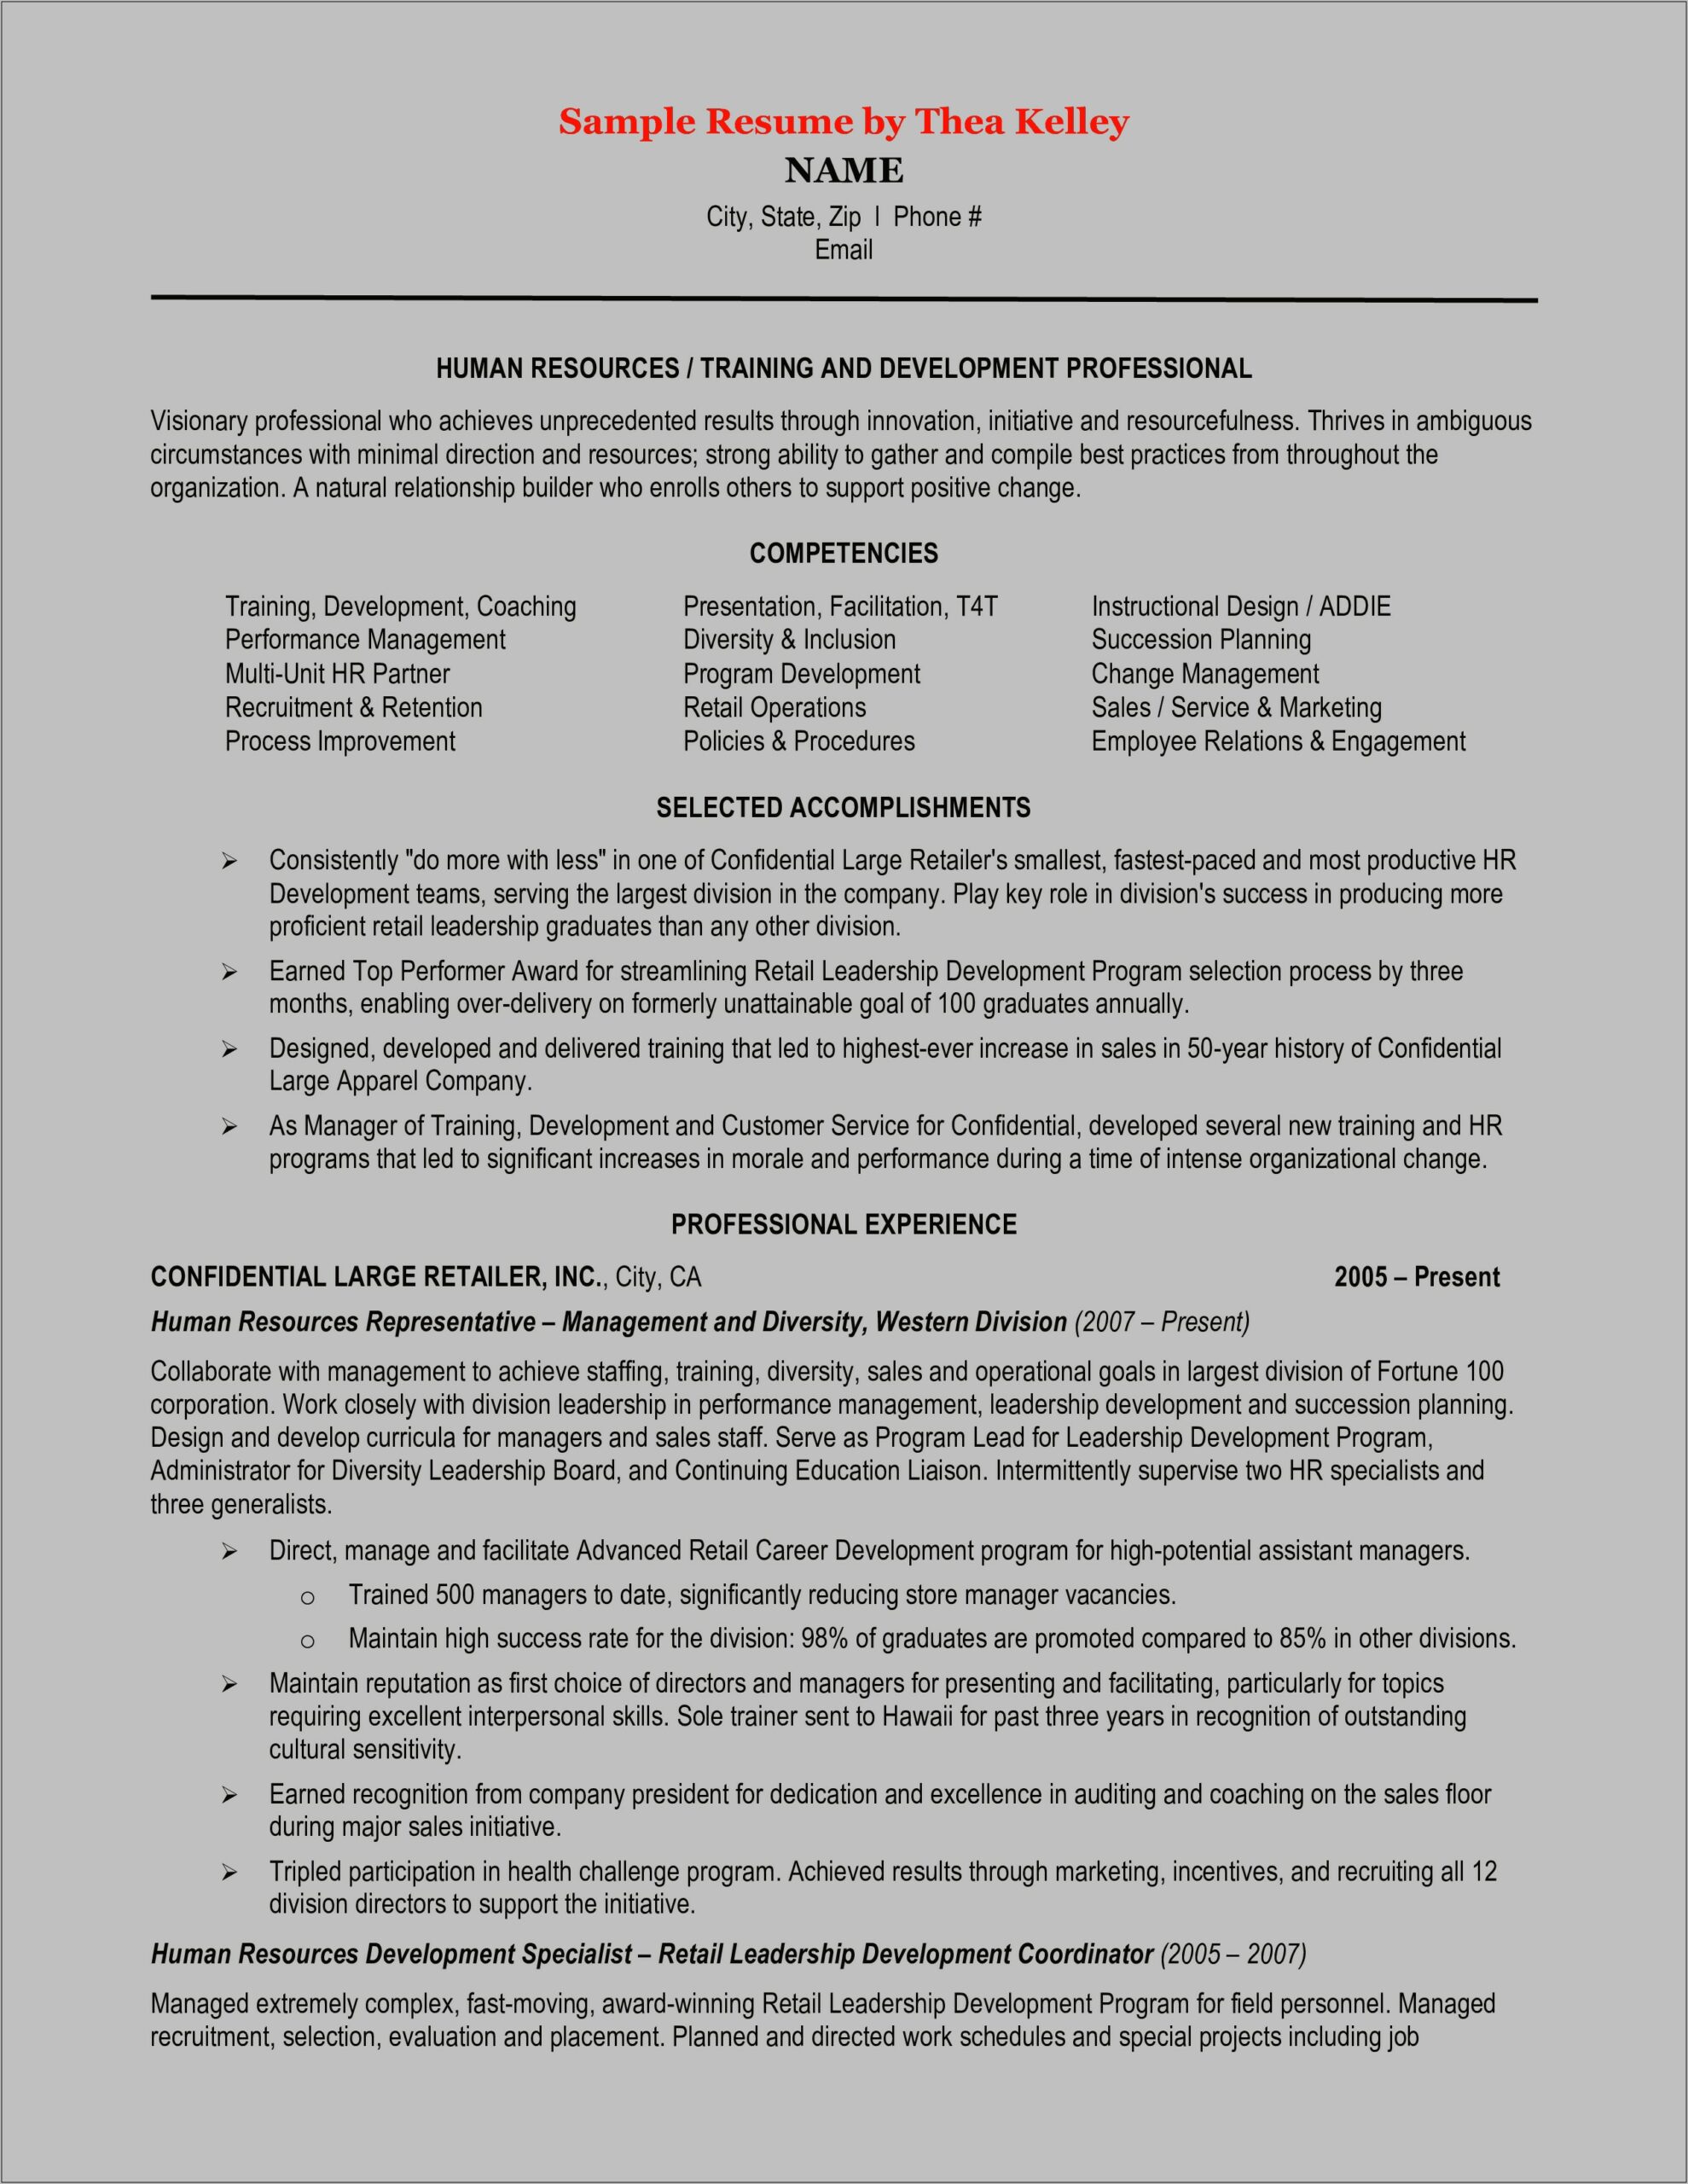 Resume Examples Human Resources Assistant